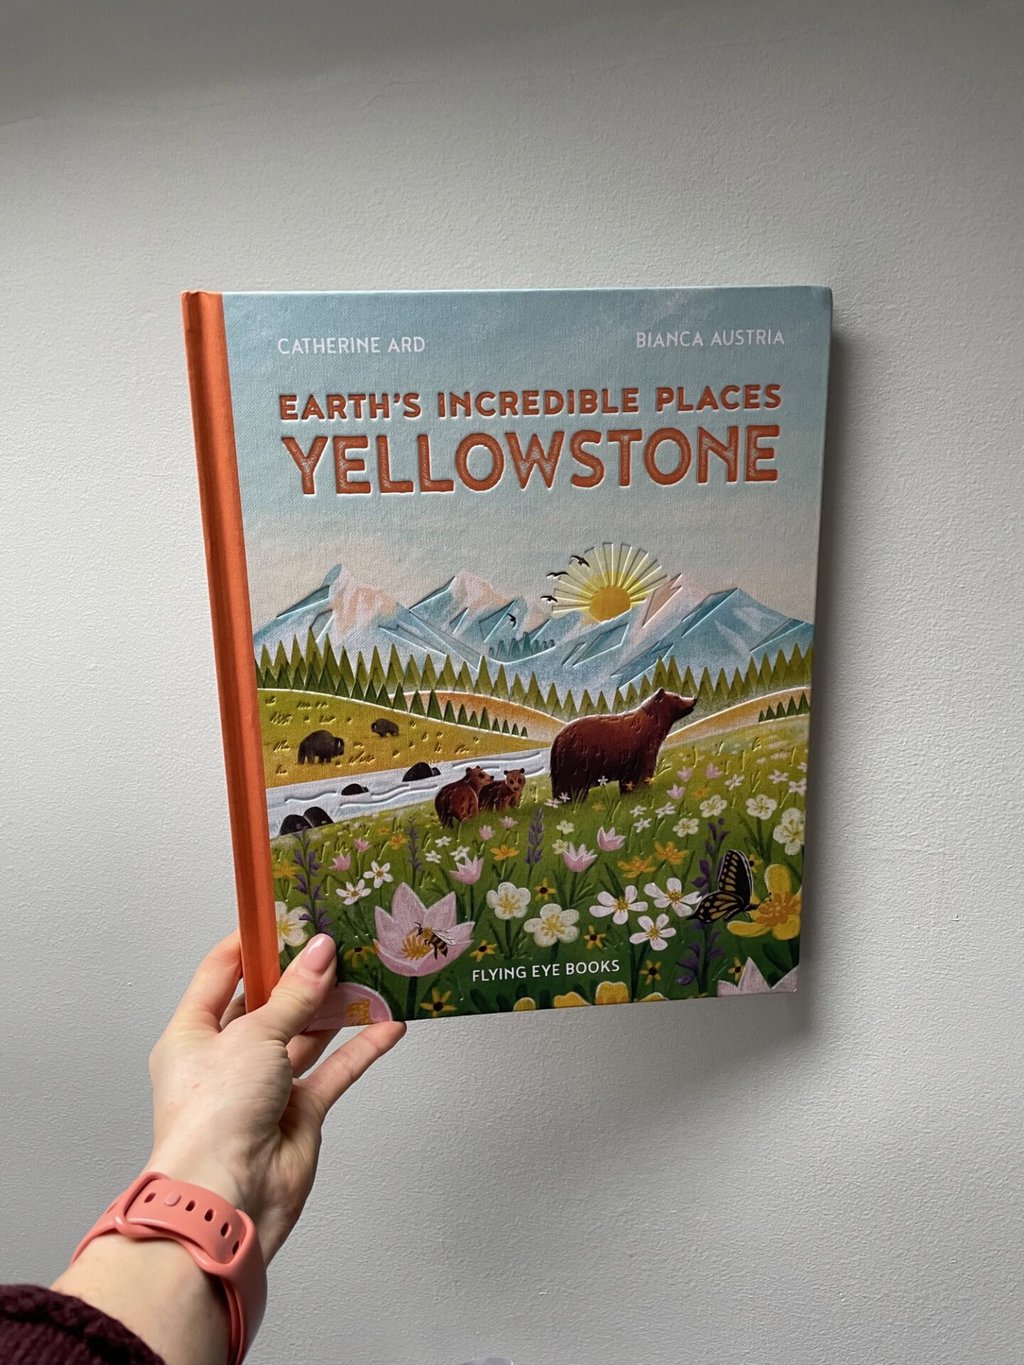 Earth’s Incredible Places – Yellowstone – Catherine Ard (author), Bianca Austria (illustrator), Flying Eye Books (publisher)